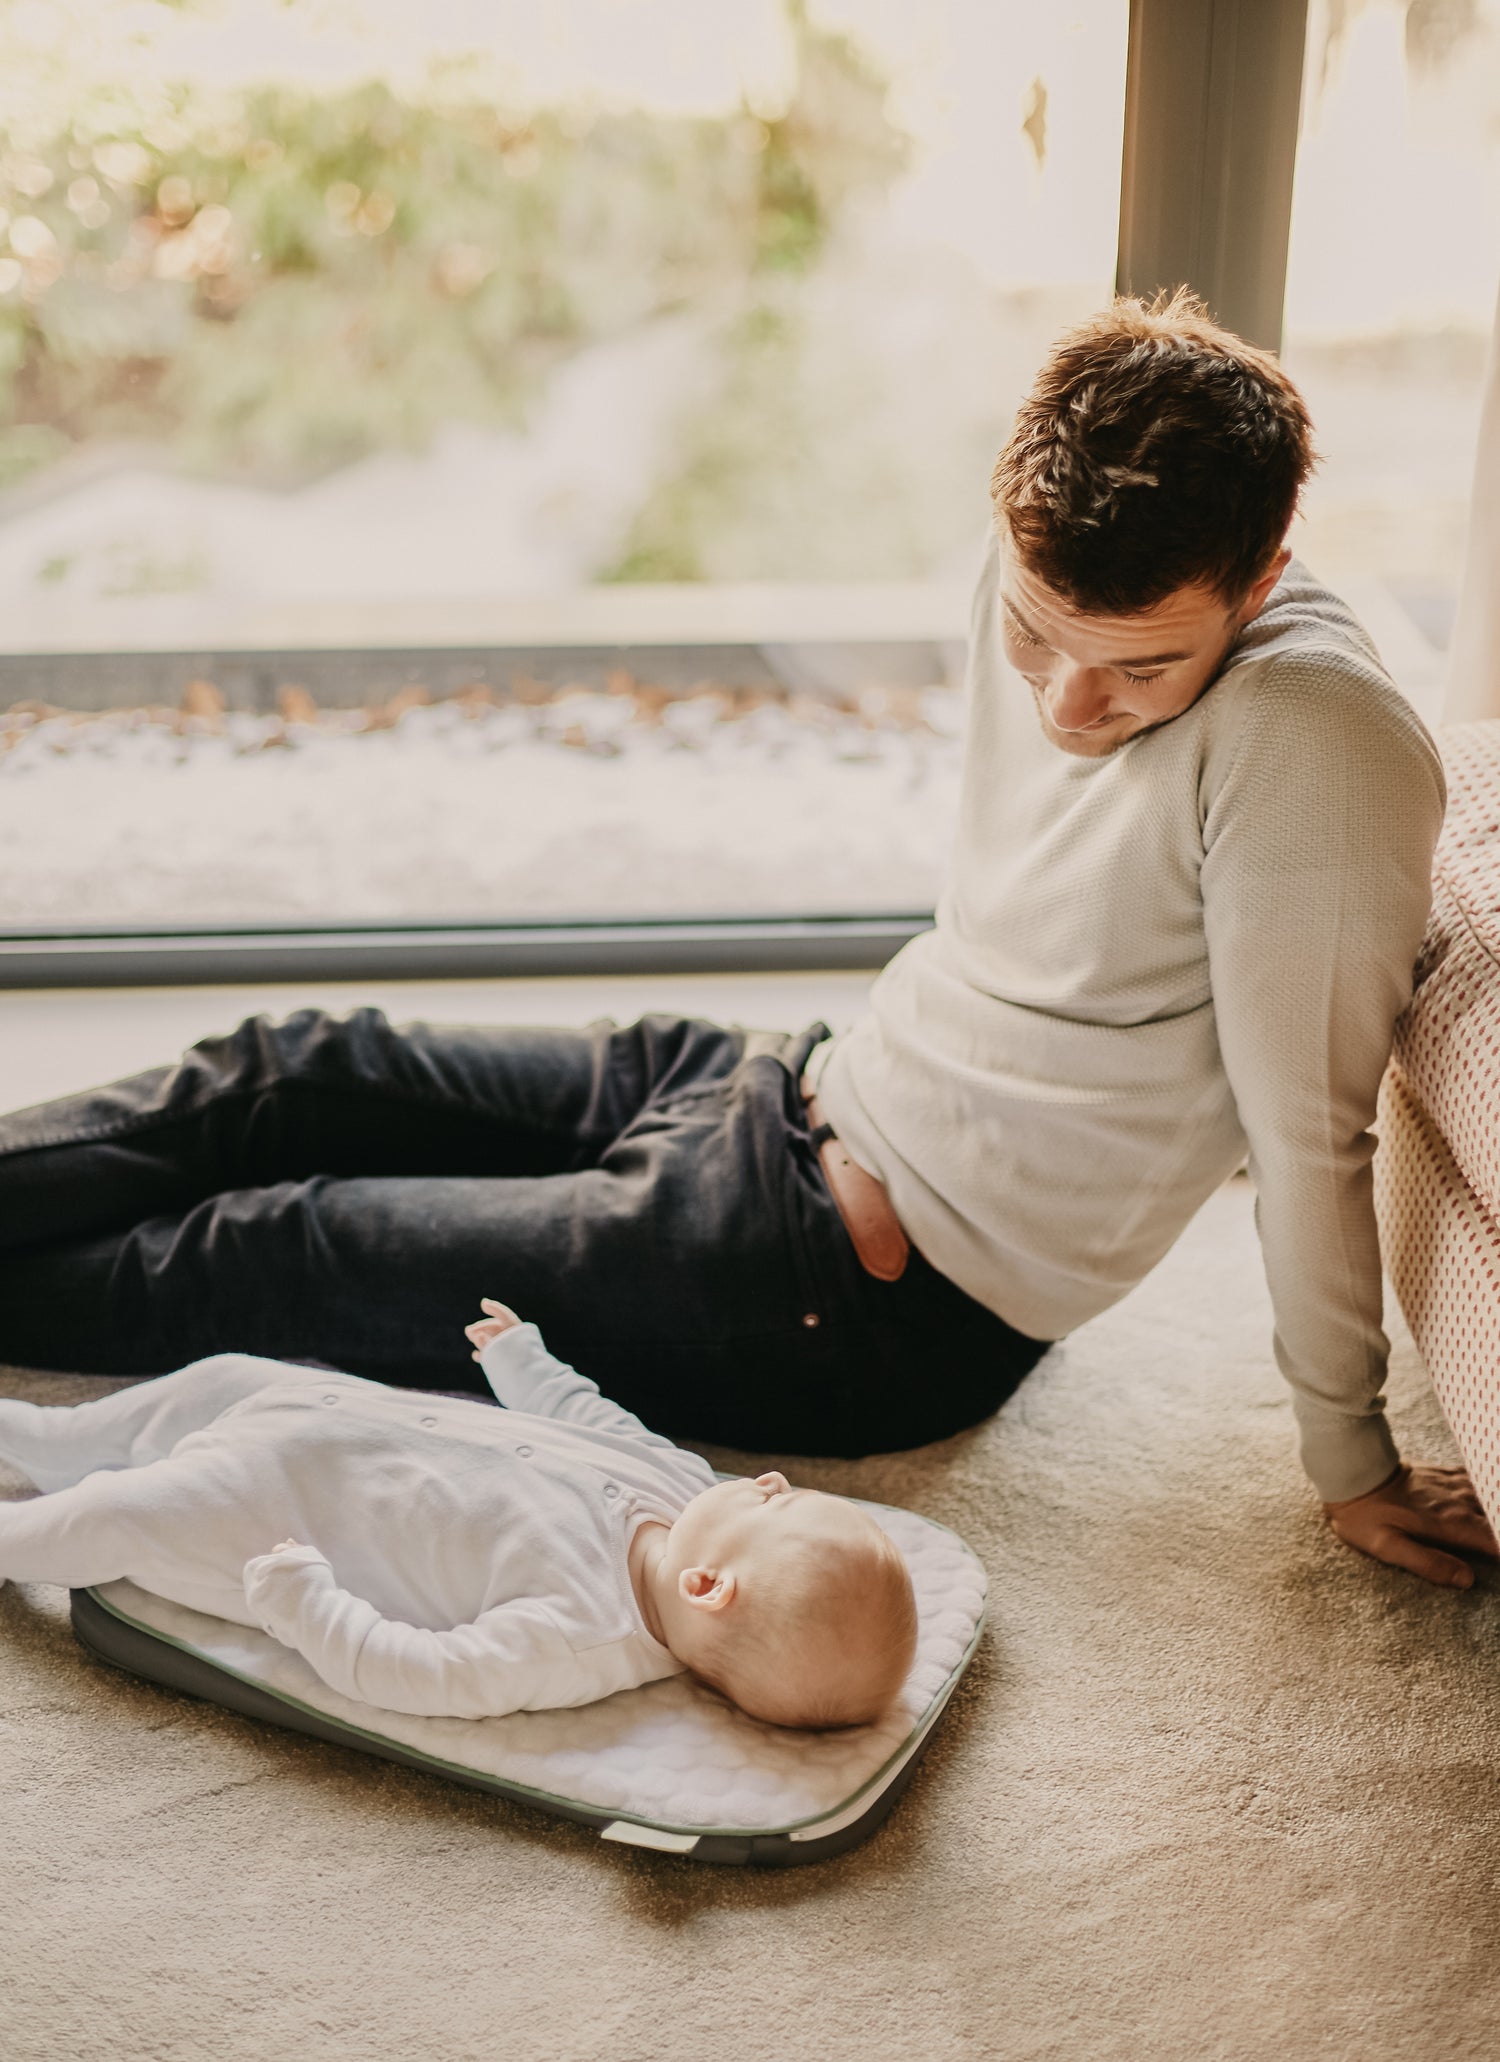 Breaking Barriers: The Transformative Power of Paternity Leave